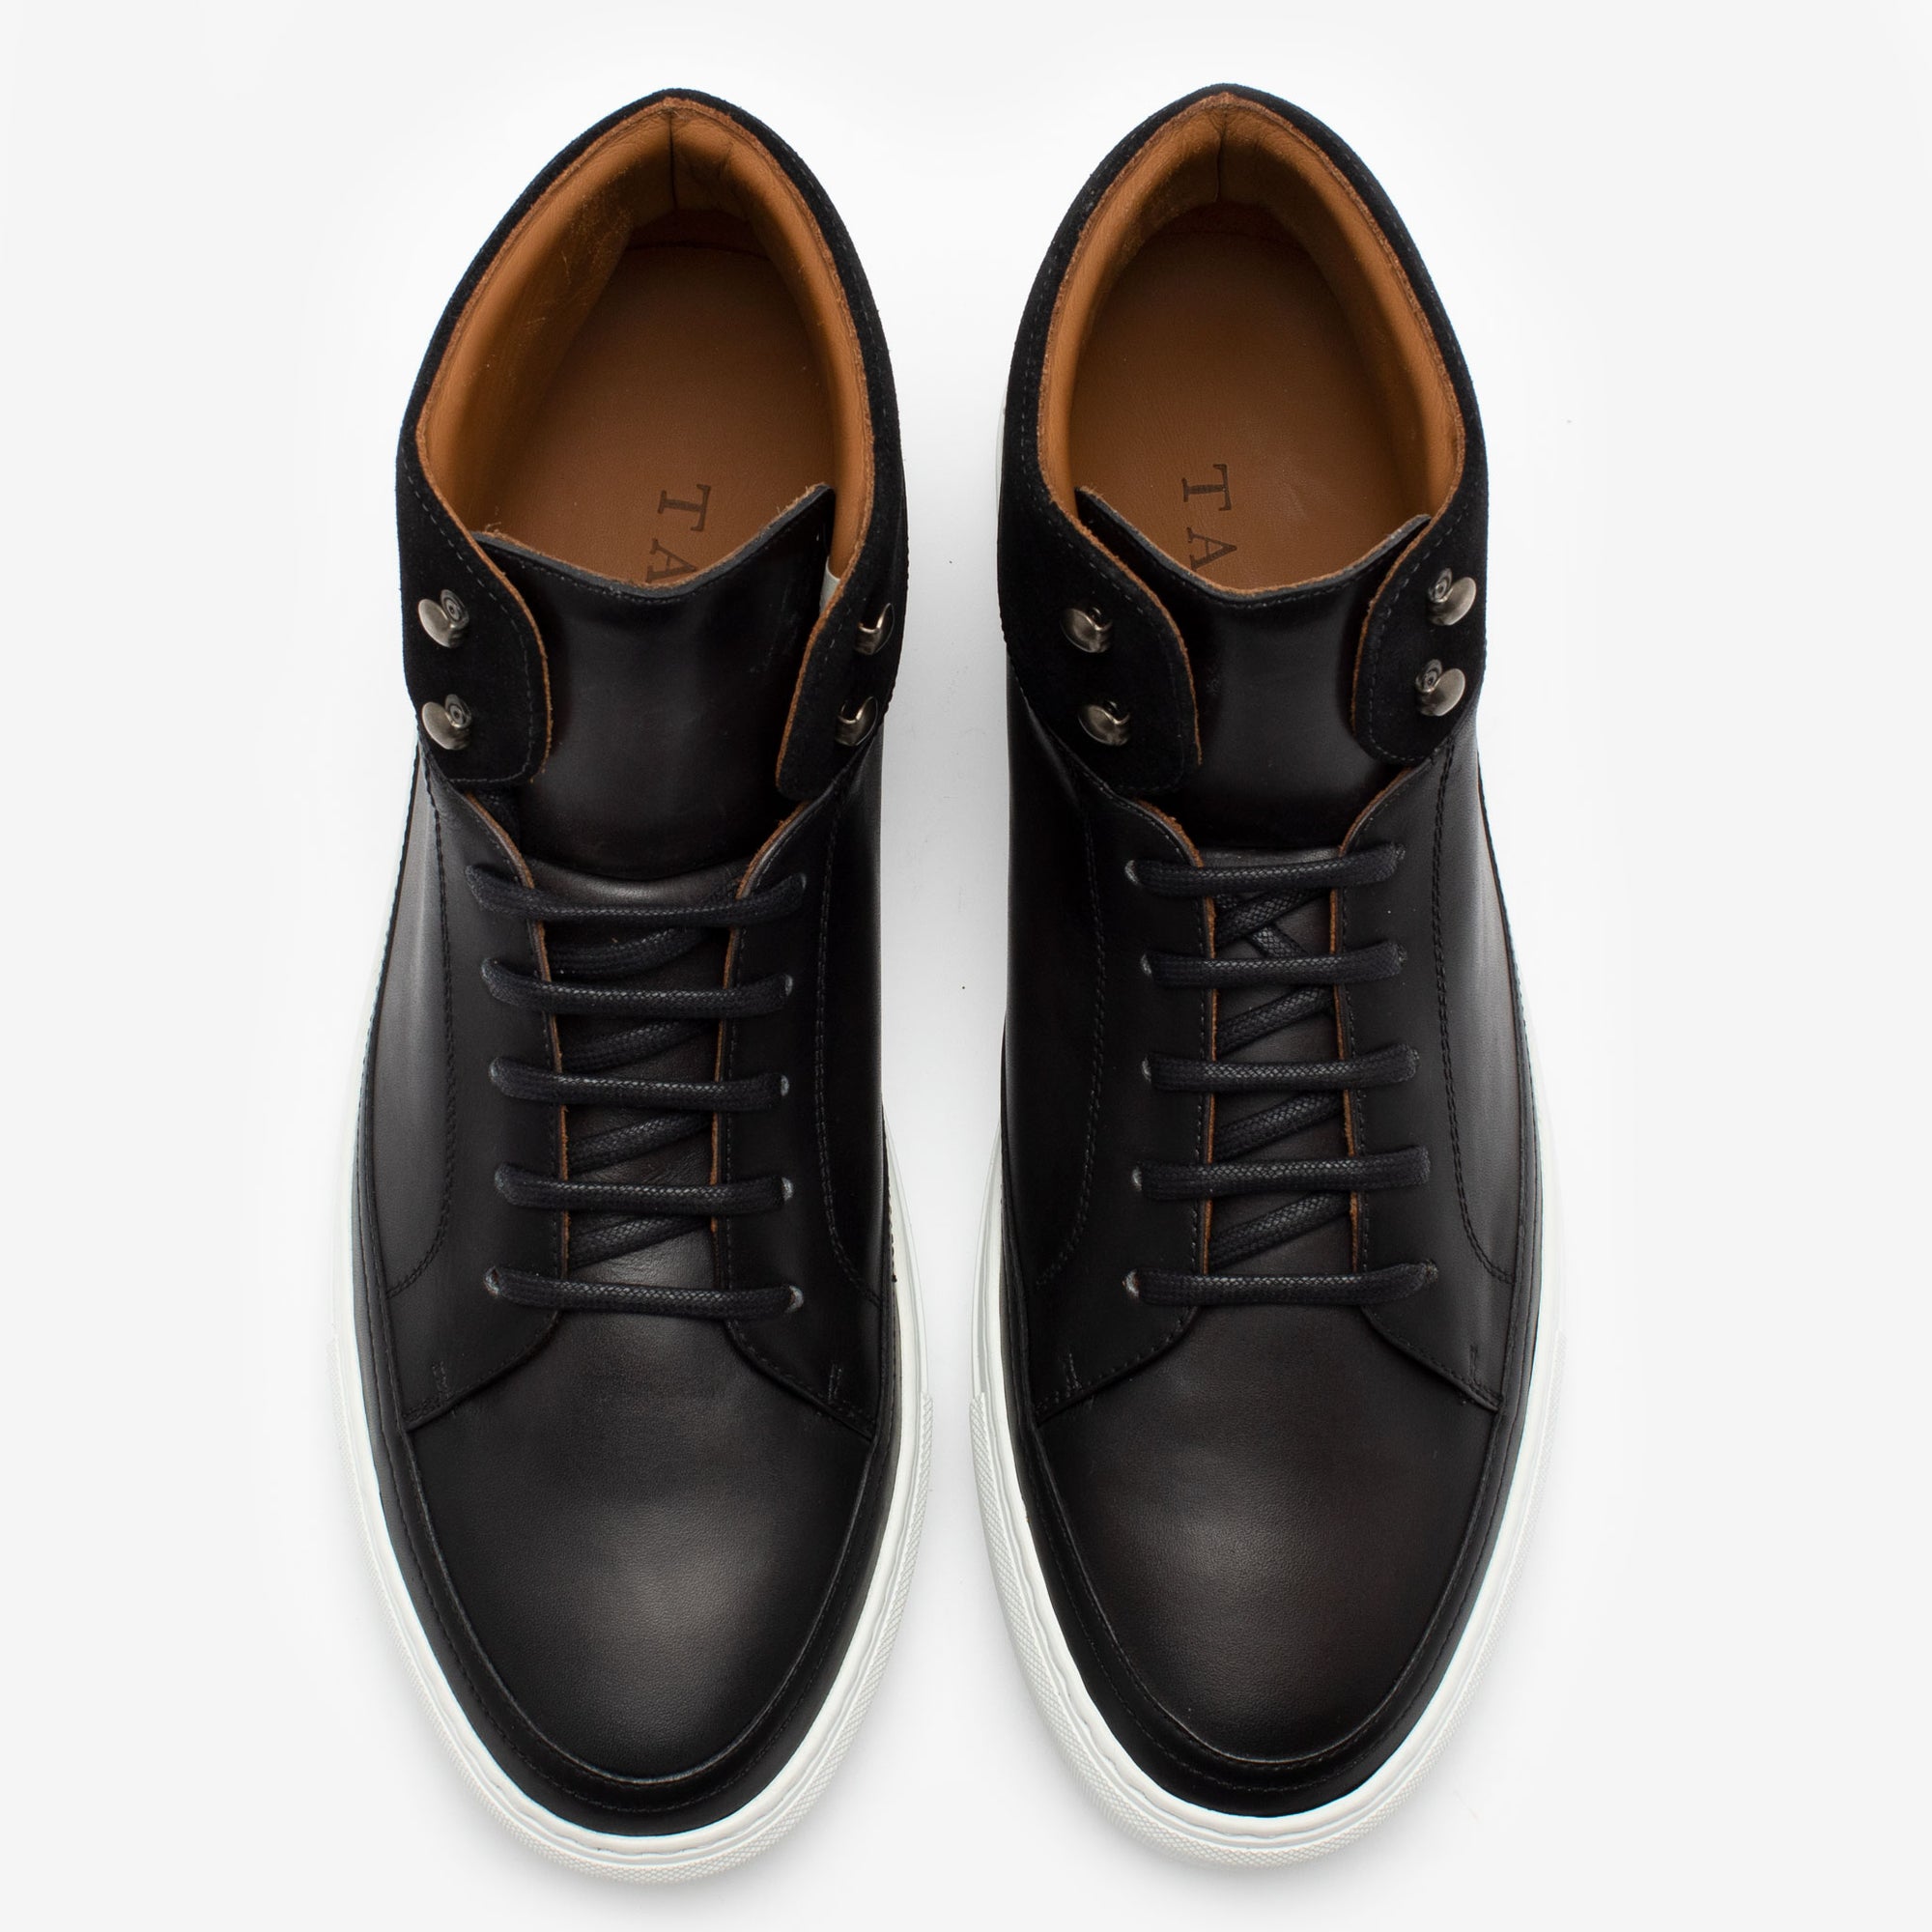 The Fifth Ave Hightop Sneaker in Black